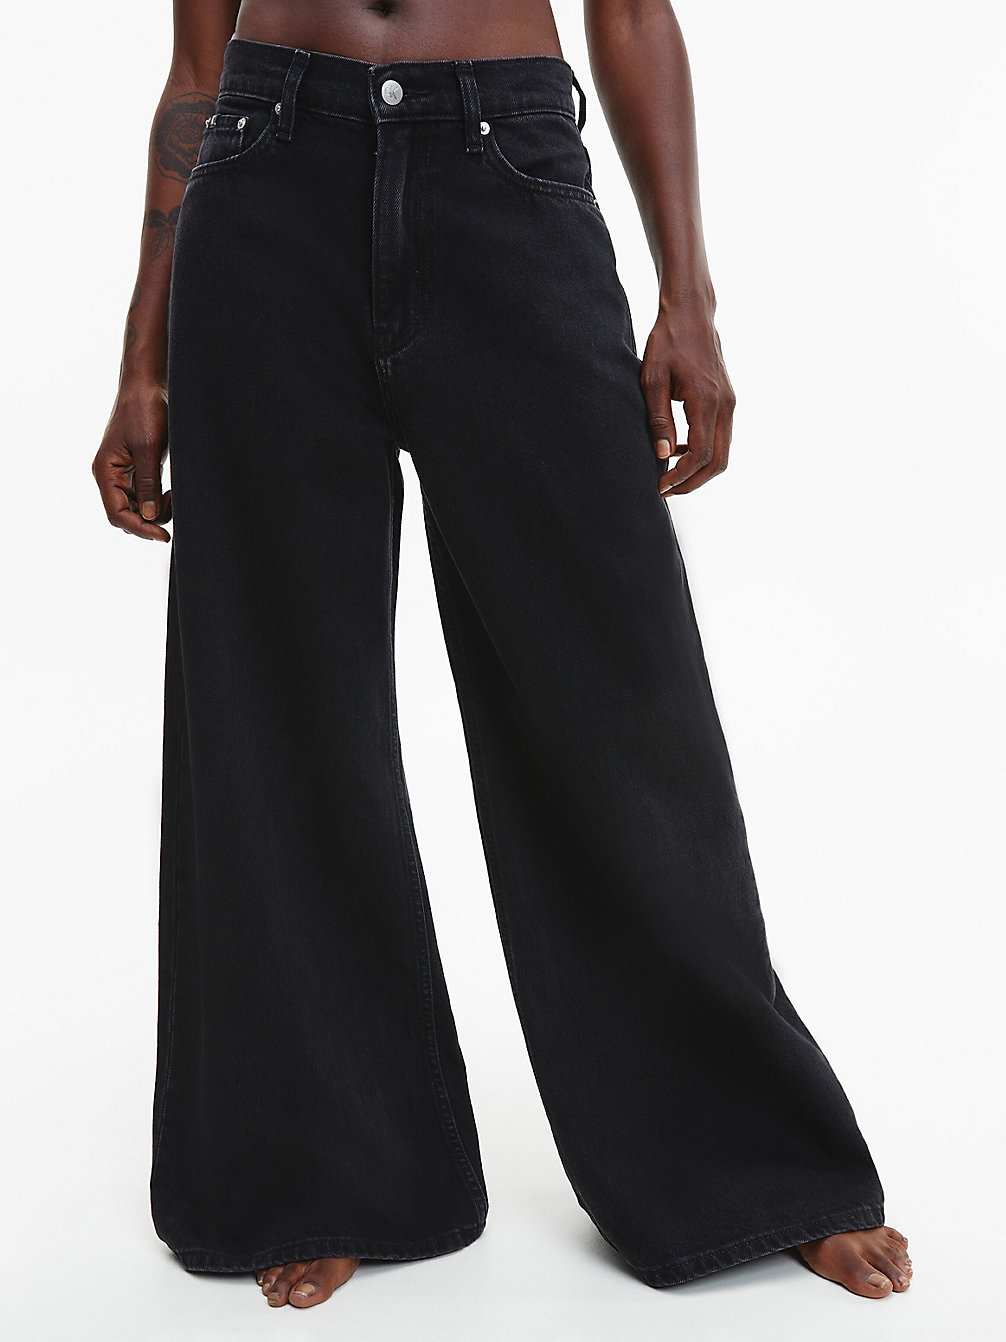 Low Rise Loose Jeans > DENIM BLACK > undefined mujer > Calvin Klein